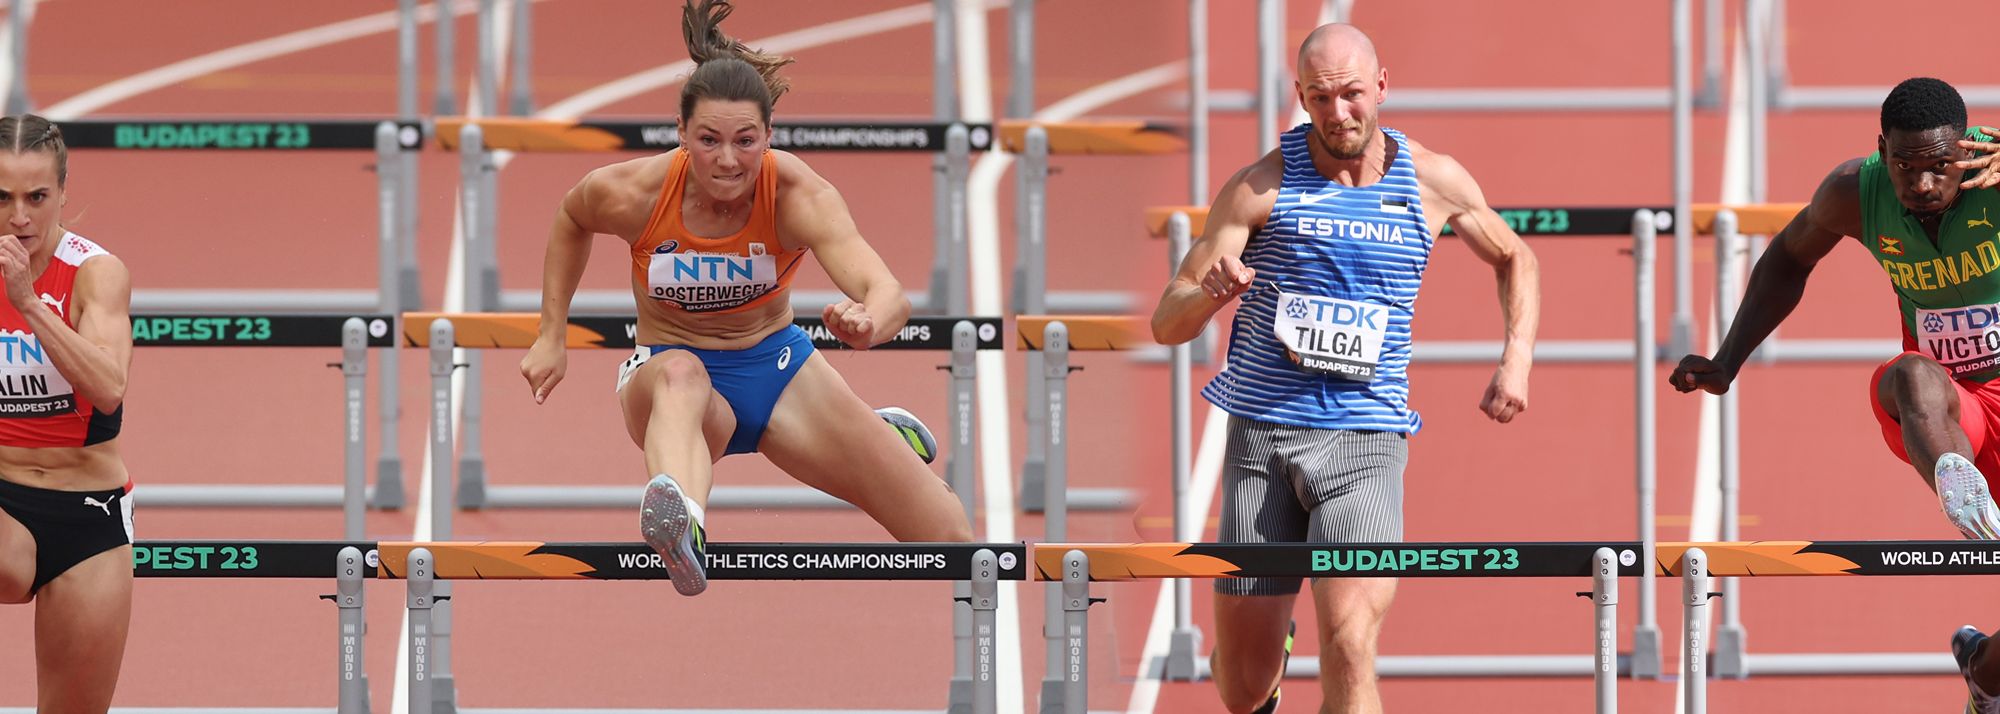 Emma Oosterwegel and Karel Tilga have been confirmed as the winners of the 2023 World Athletics Combined Events Tour, which rewards their season-long consistency in the heptathlon and decathlon